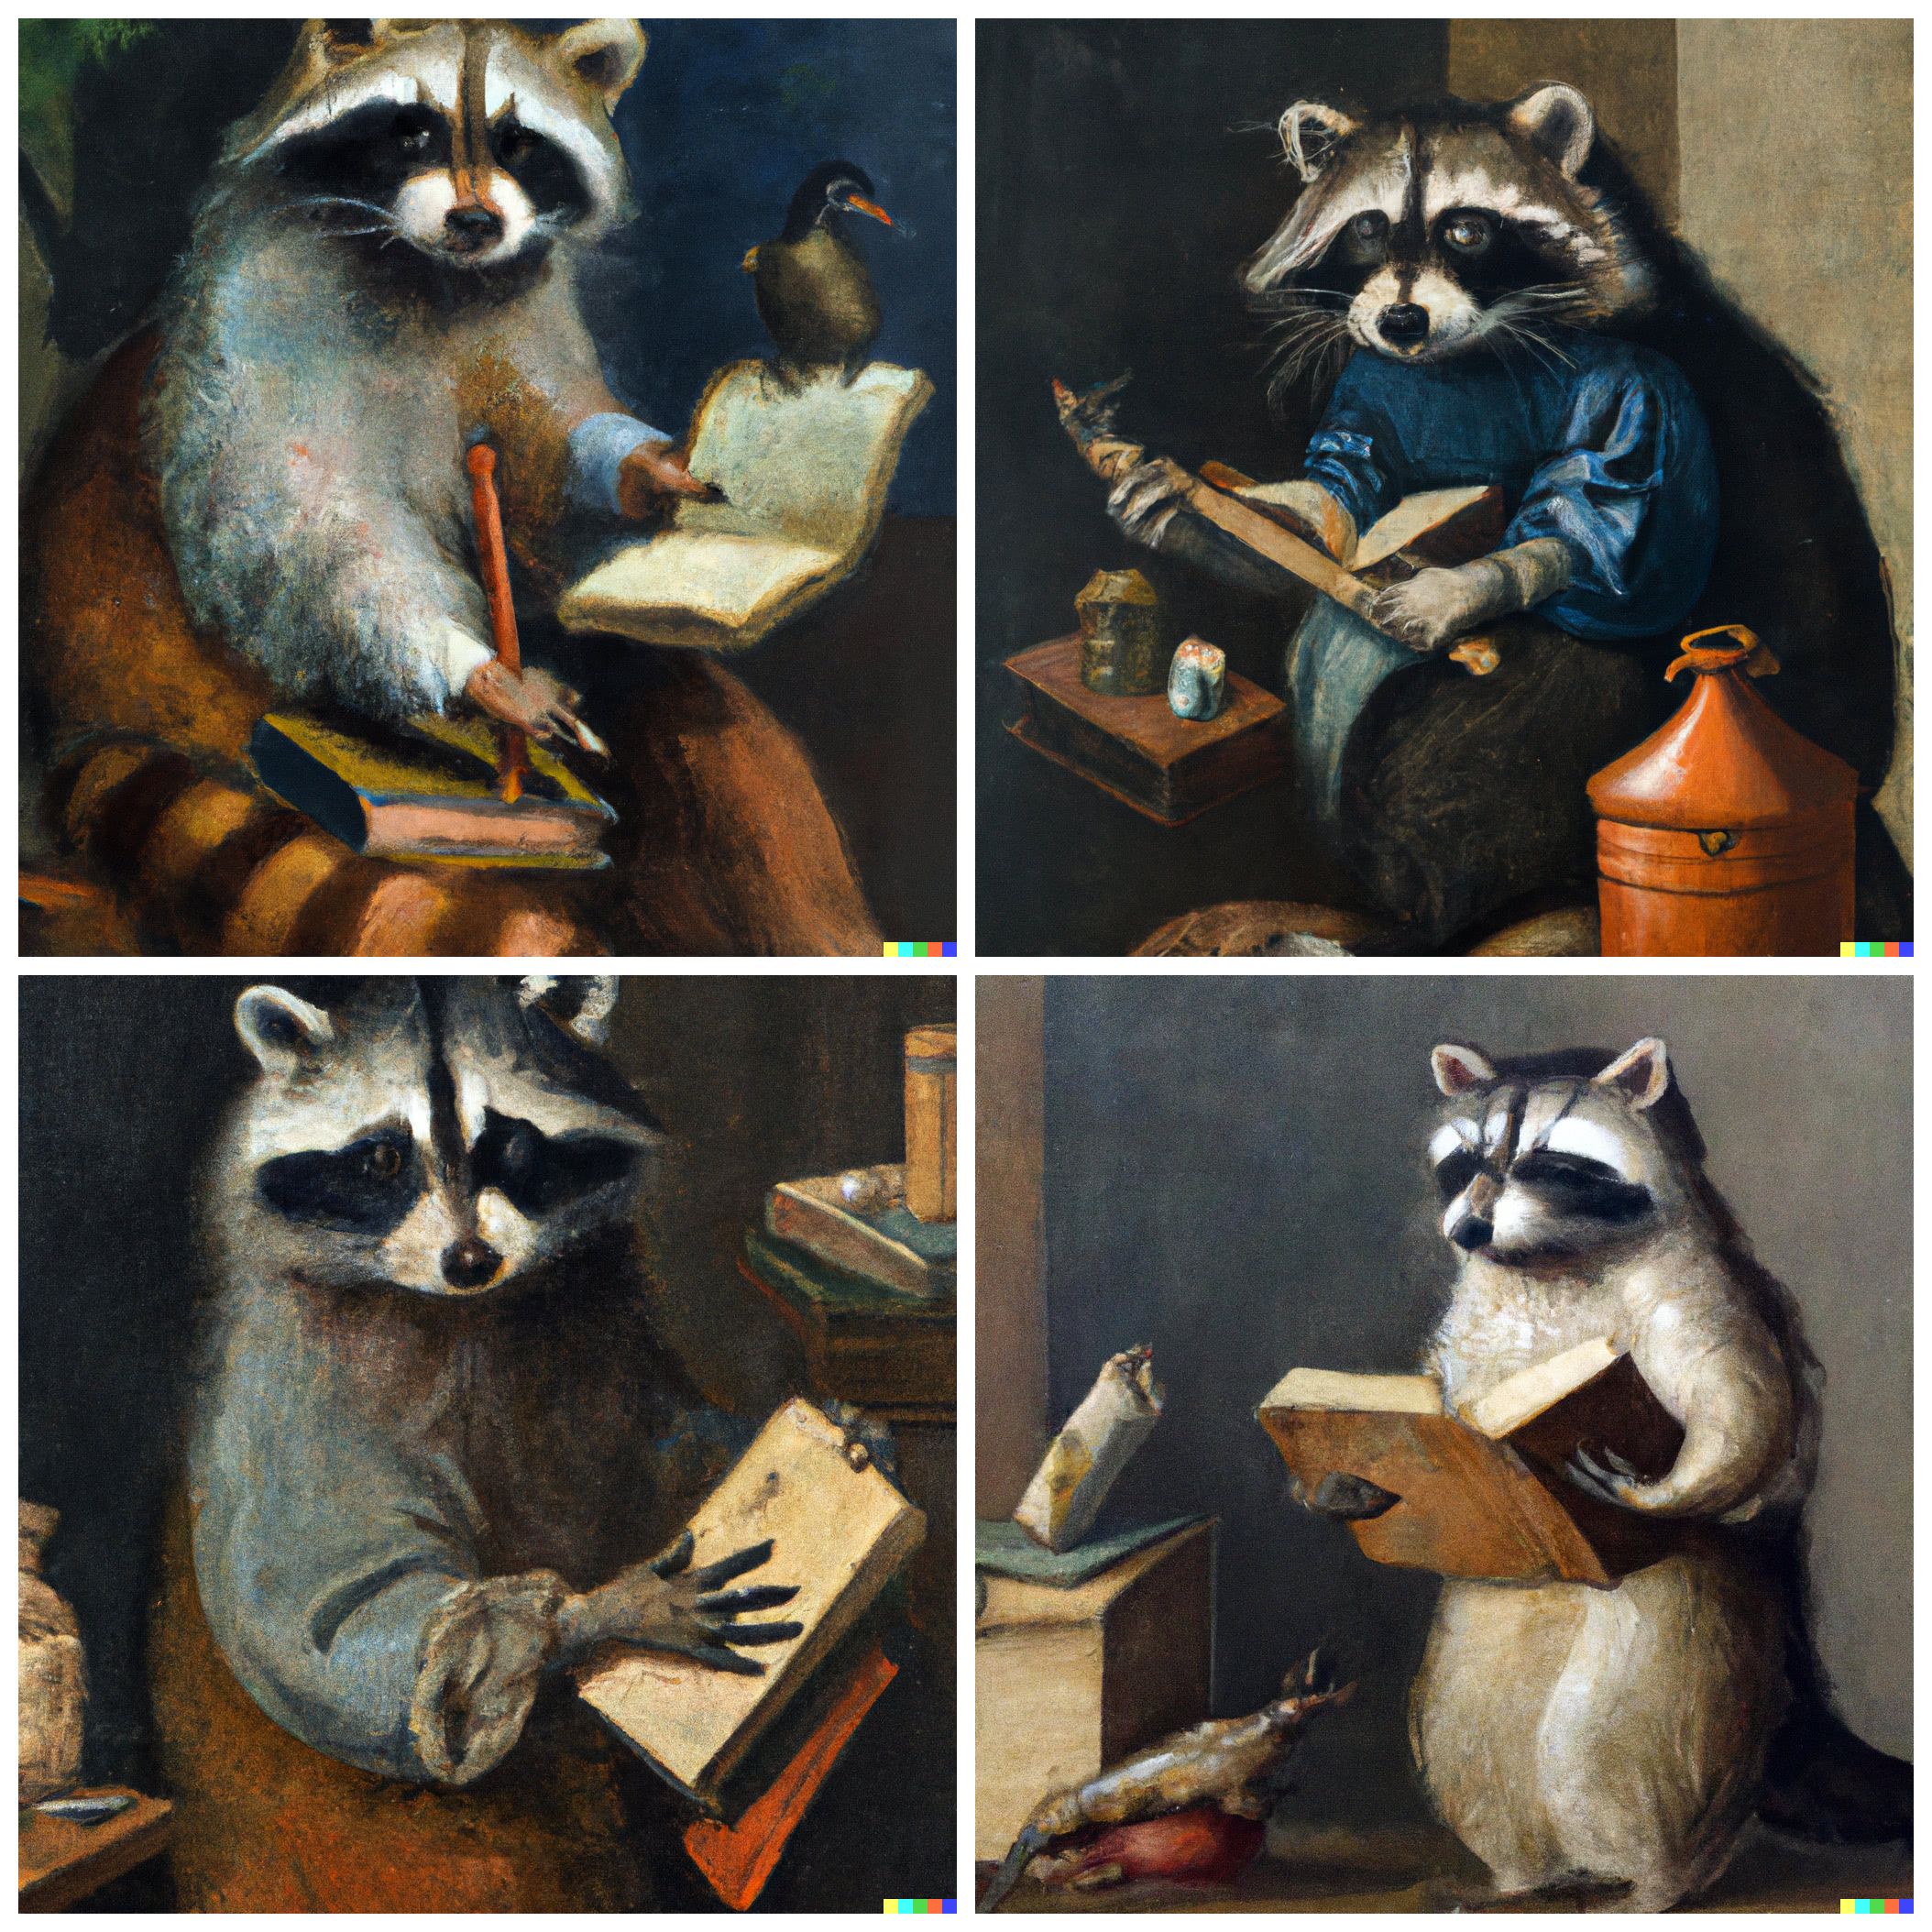 A raccoon with a book in one hand and a blunderbuss in its other hand by Johannes Vermeer